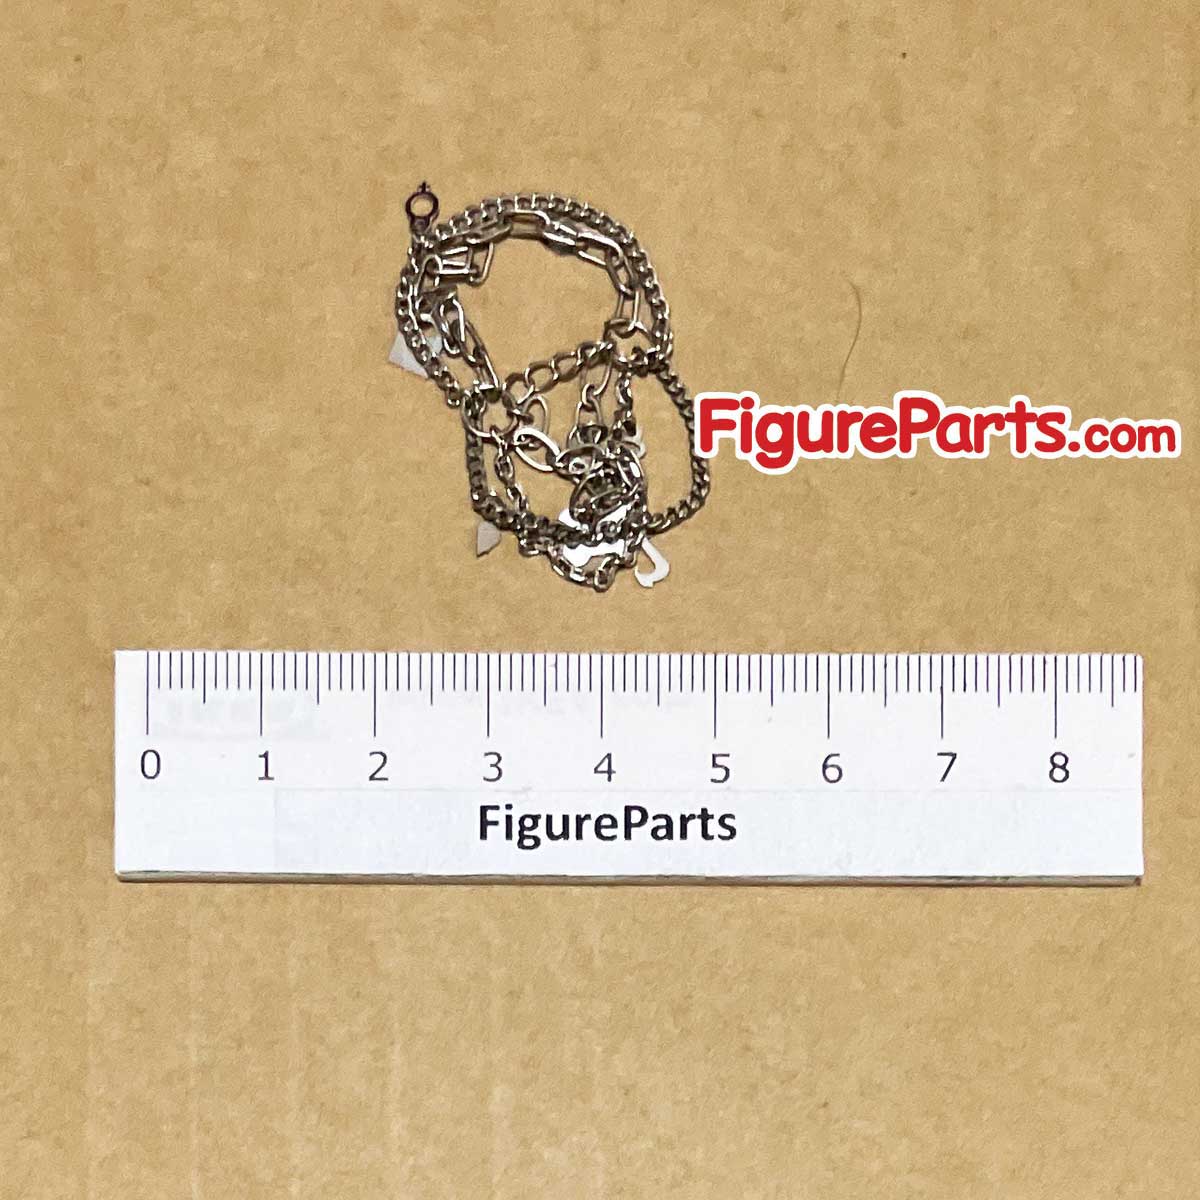 Metal Necklace Chain - Harley Quinn - Birds of Prey - Hot Toys mms565